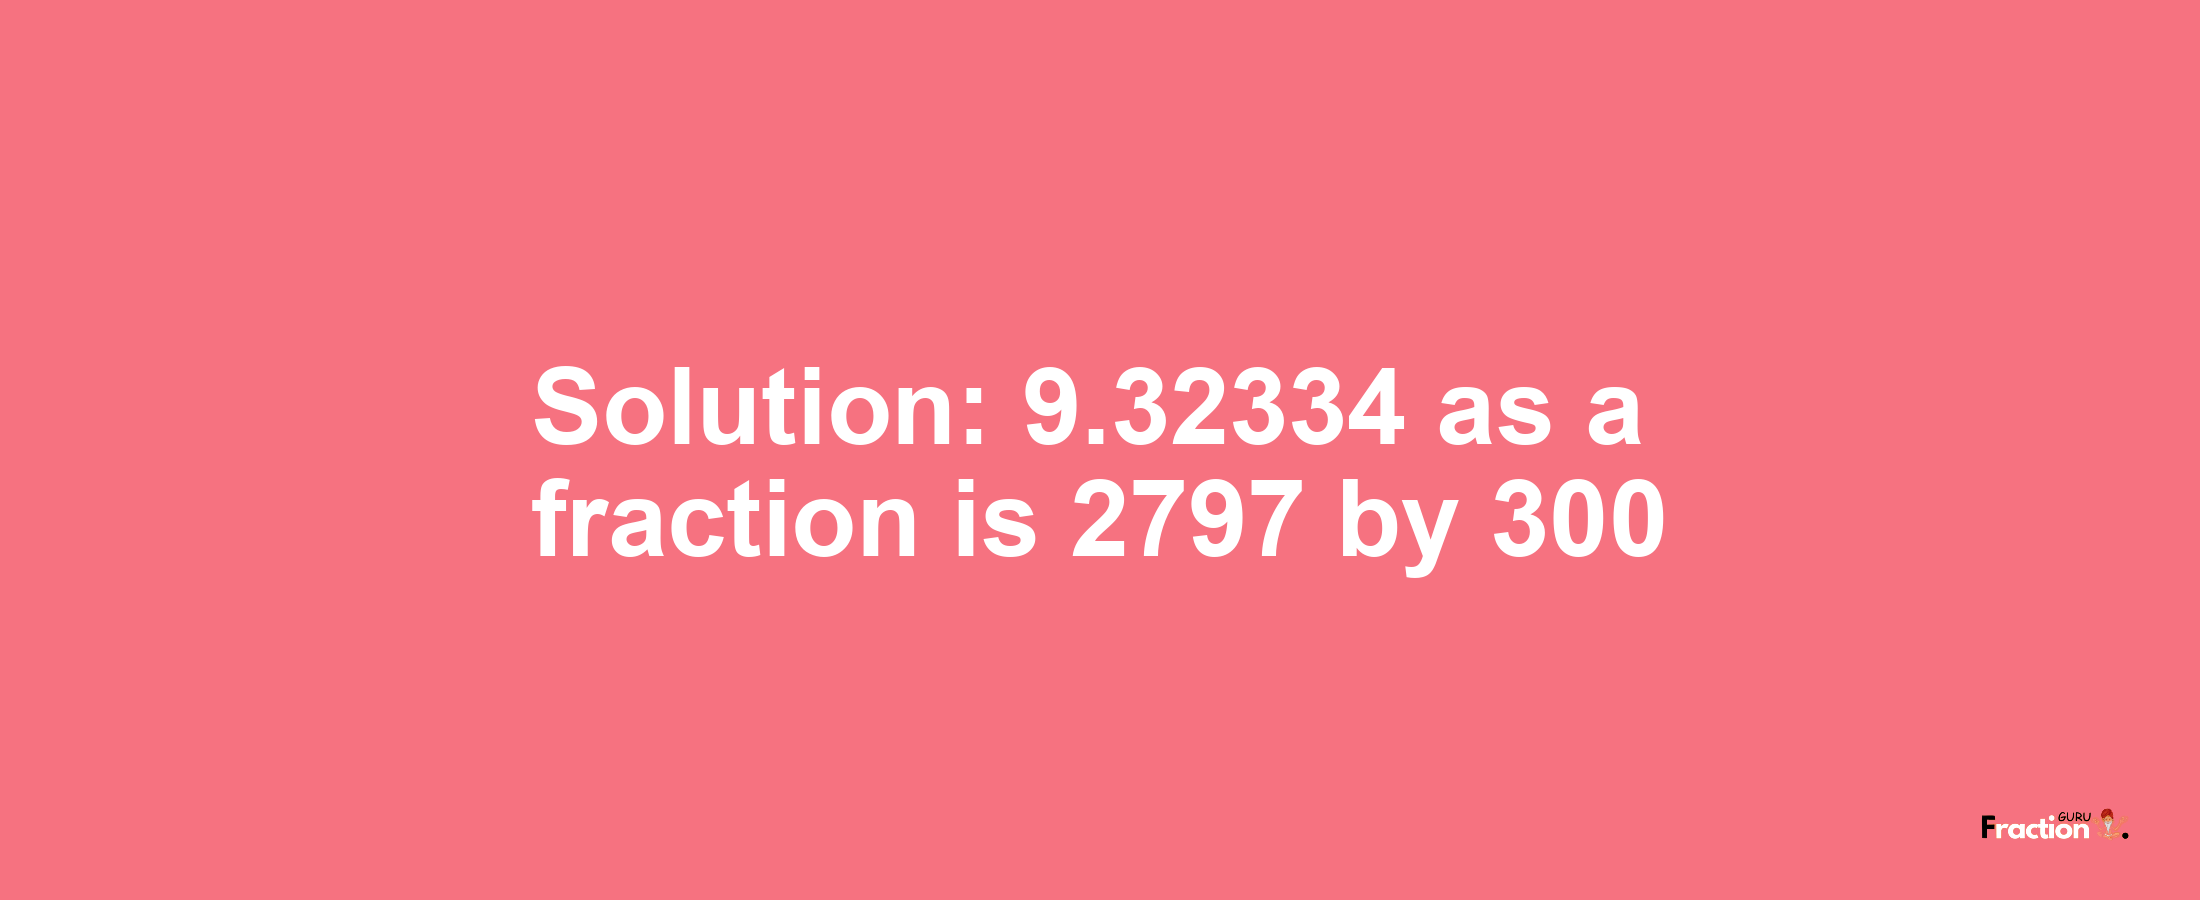 Solution:9.32334 as a fraction is 2797/300